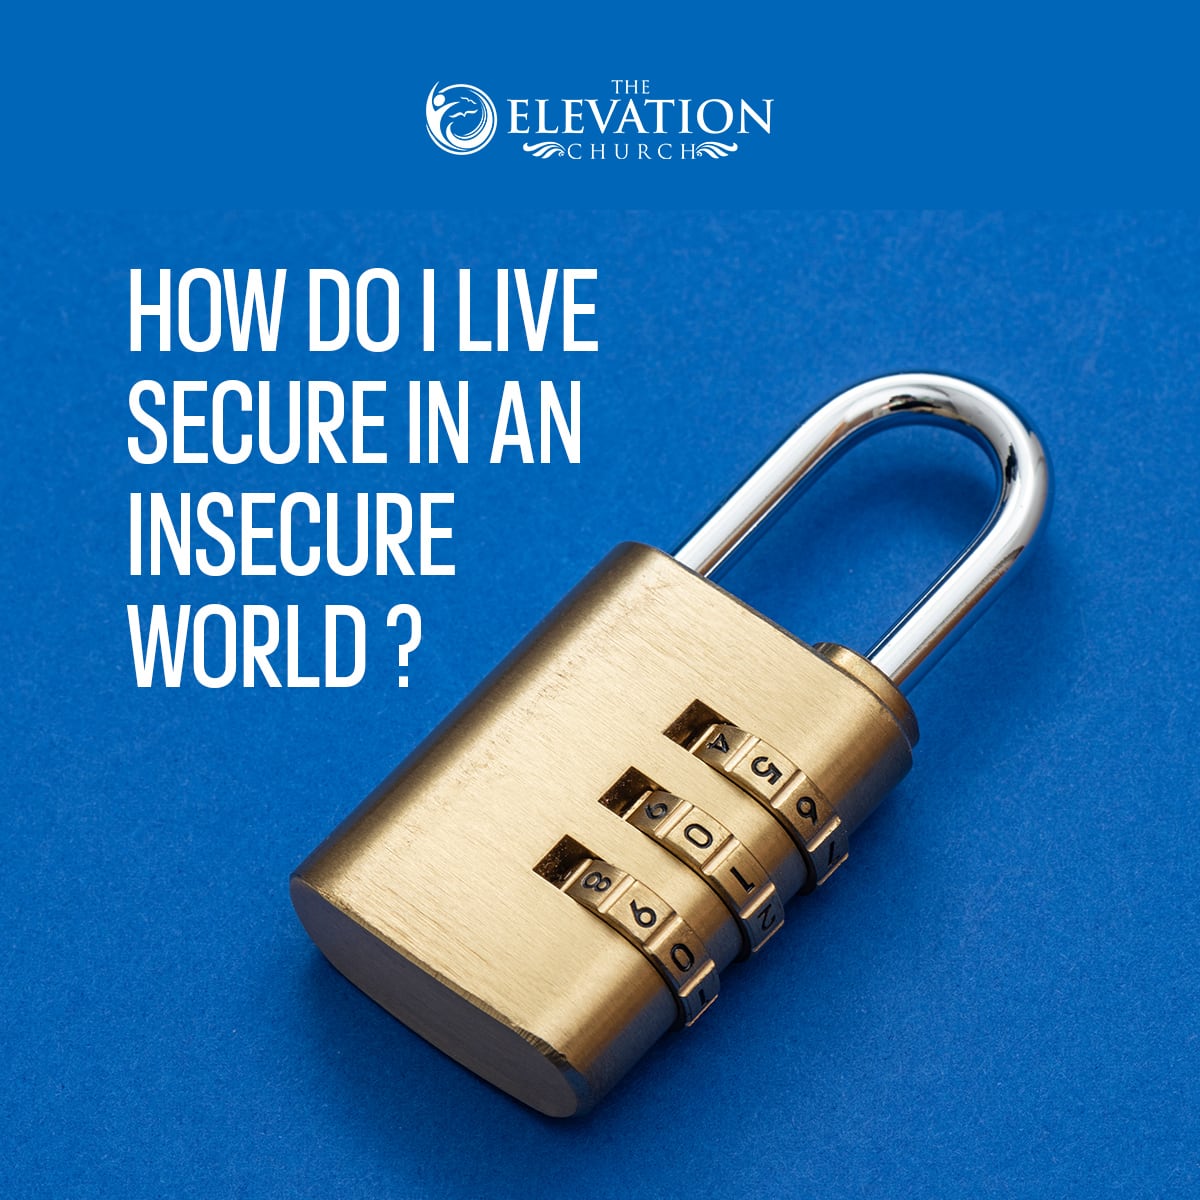 HOW DO I LIVE SECURE IN AN INSECURE WORLD?